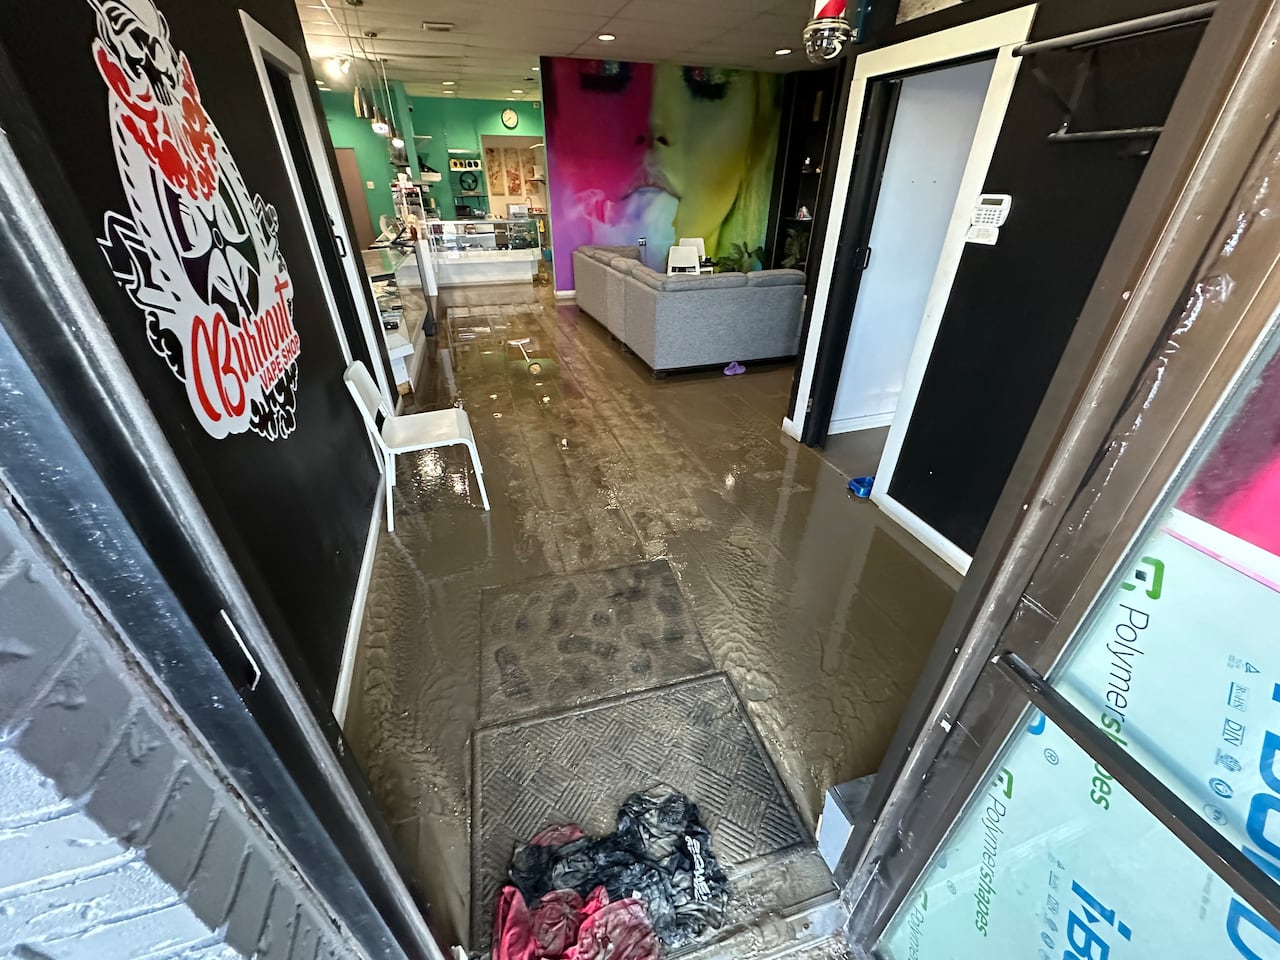 water main break floods mcphillips street businesses amid extreme cold warning